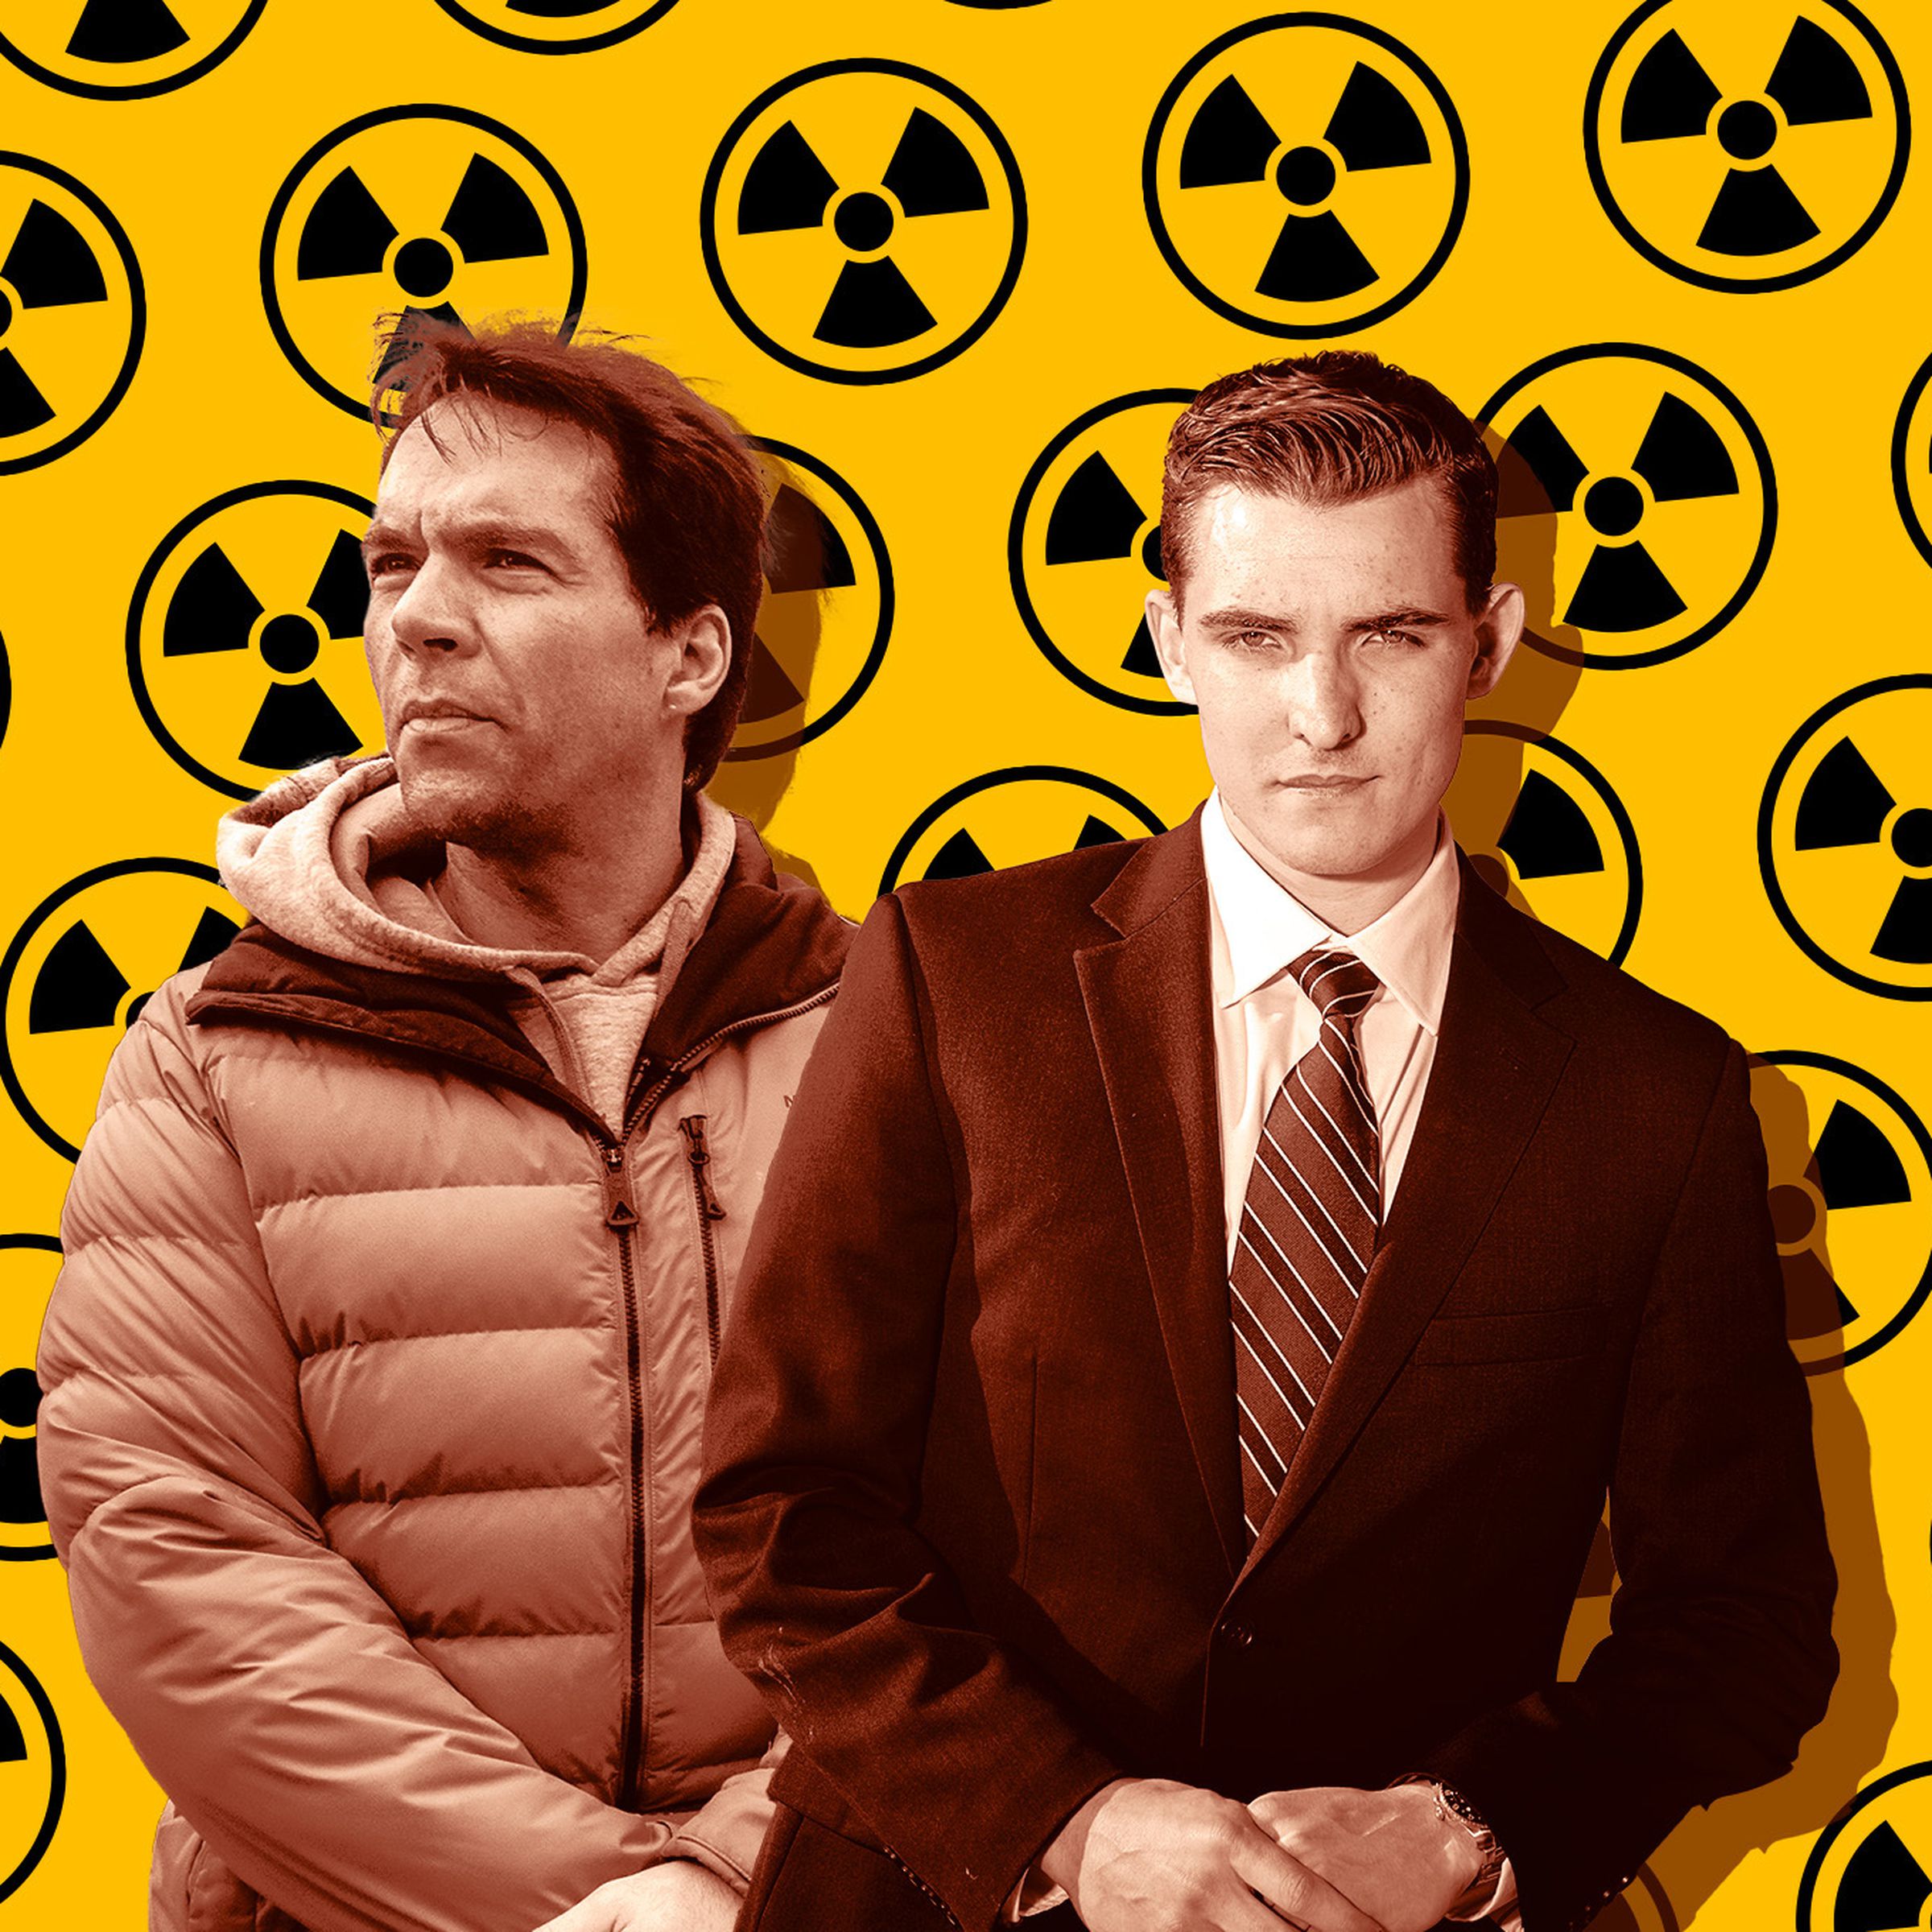 An image of Jack Burkman and Jacob Wohl against a radioactive background